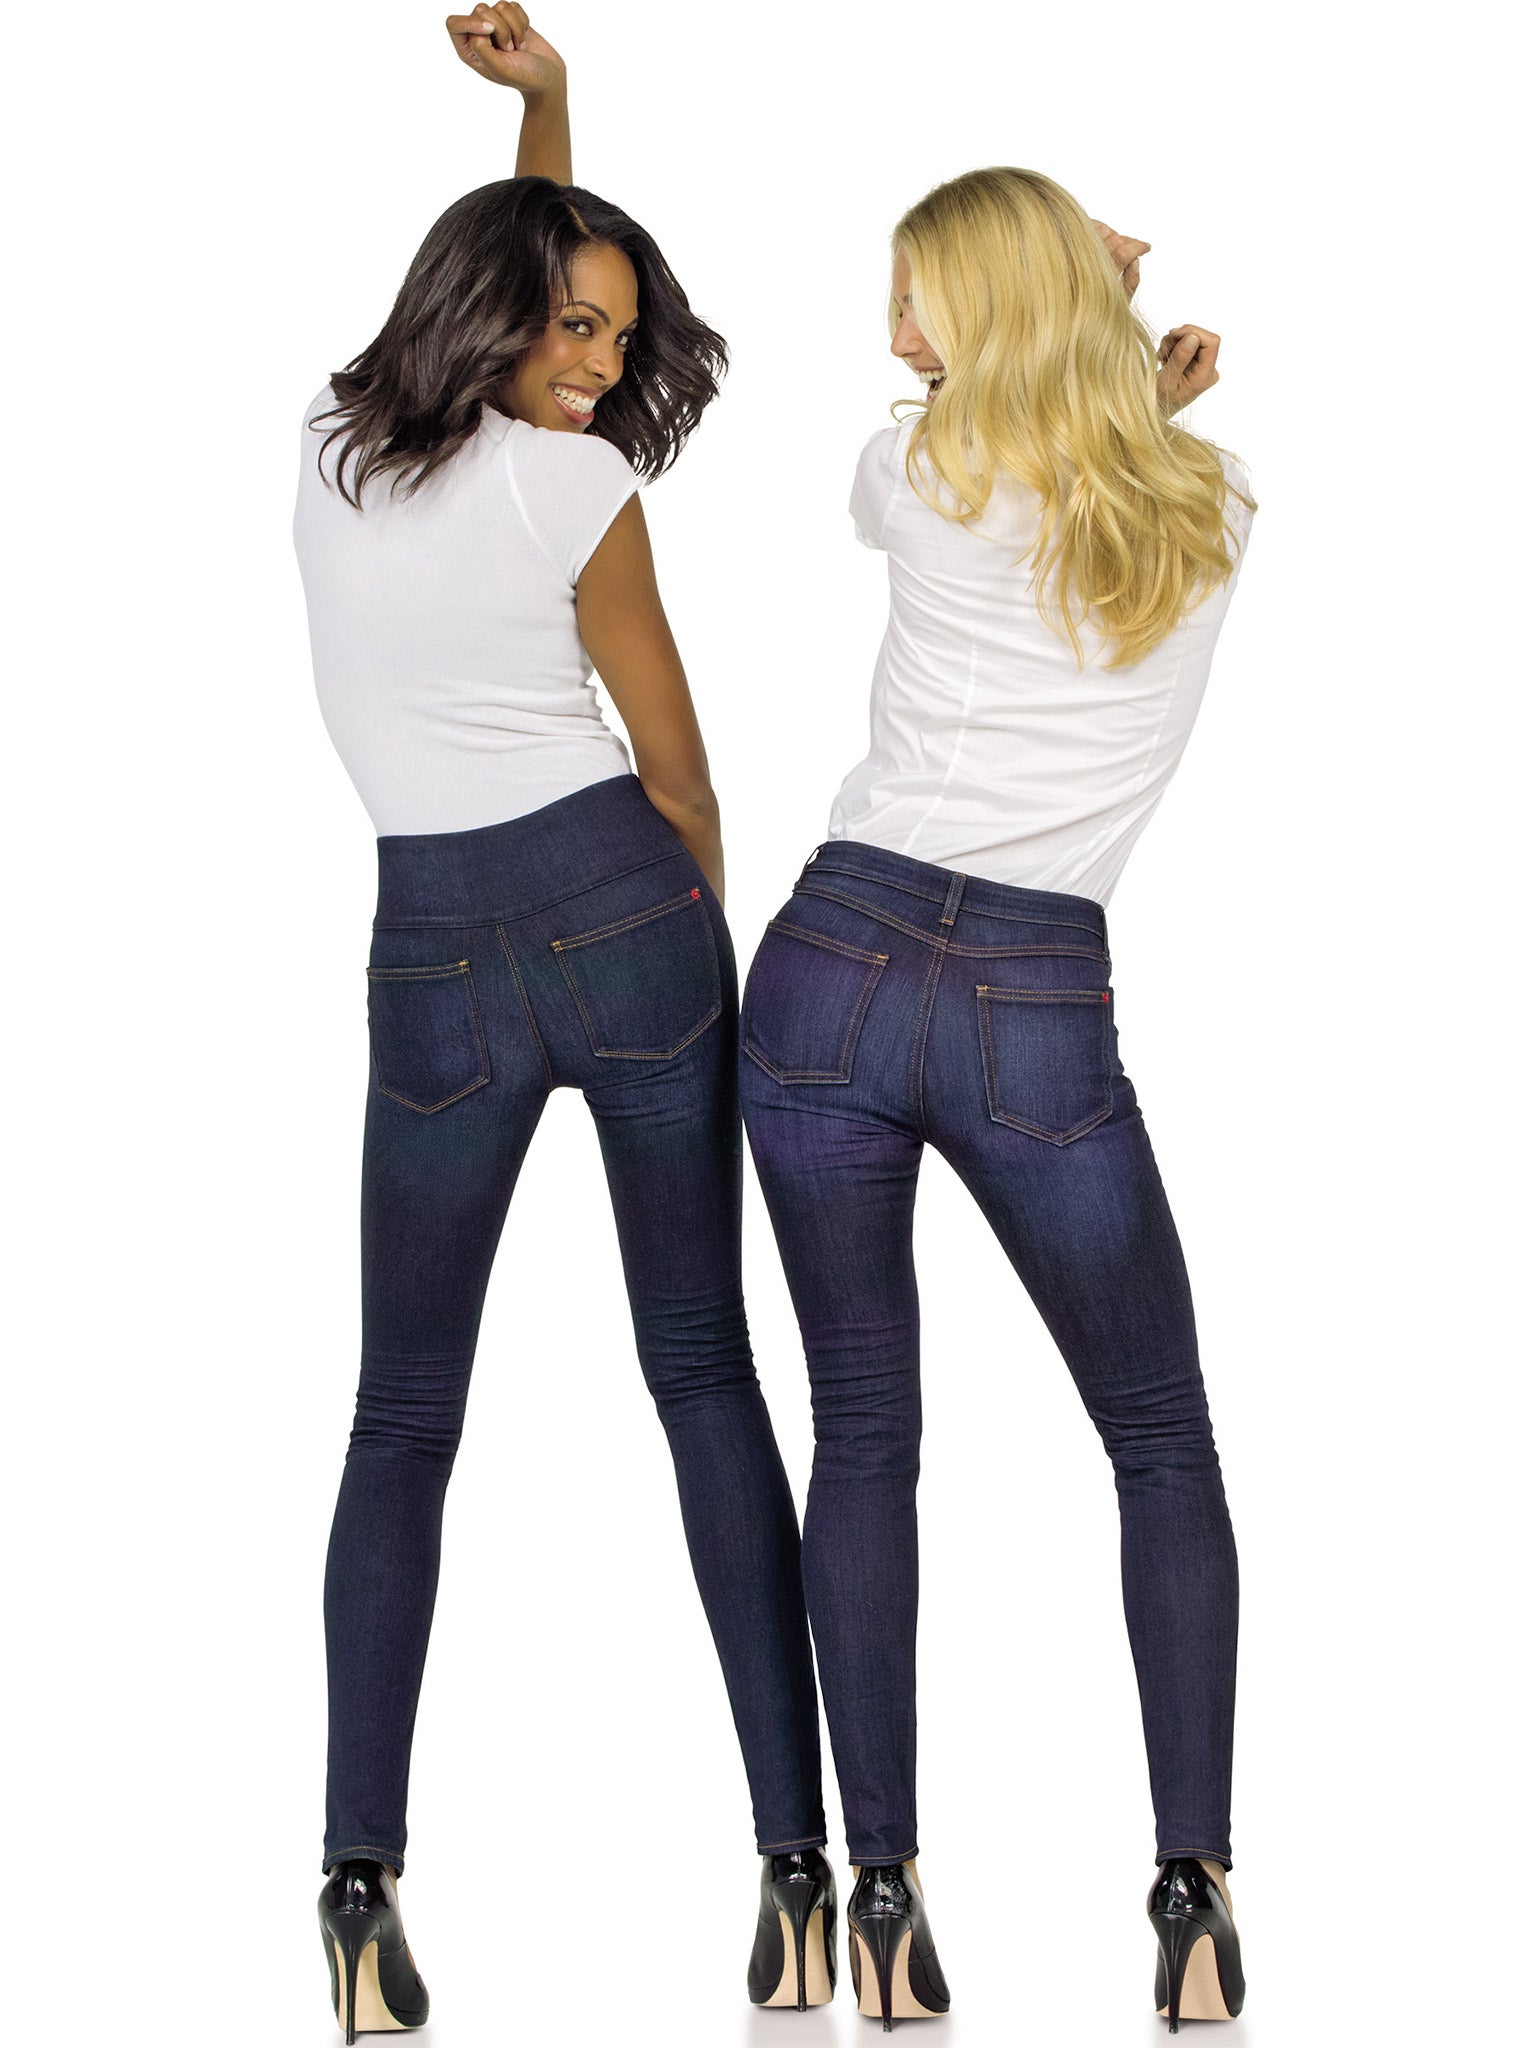 Billionaire founder of Spanx launches range of jeans that offers  thigh-trimming construction, The Independent